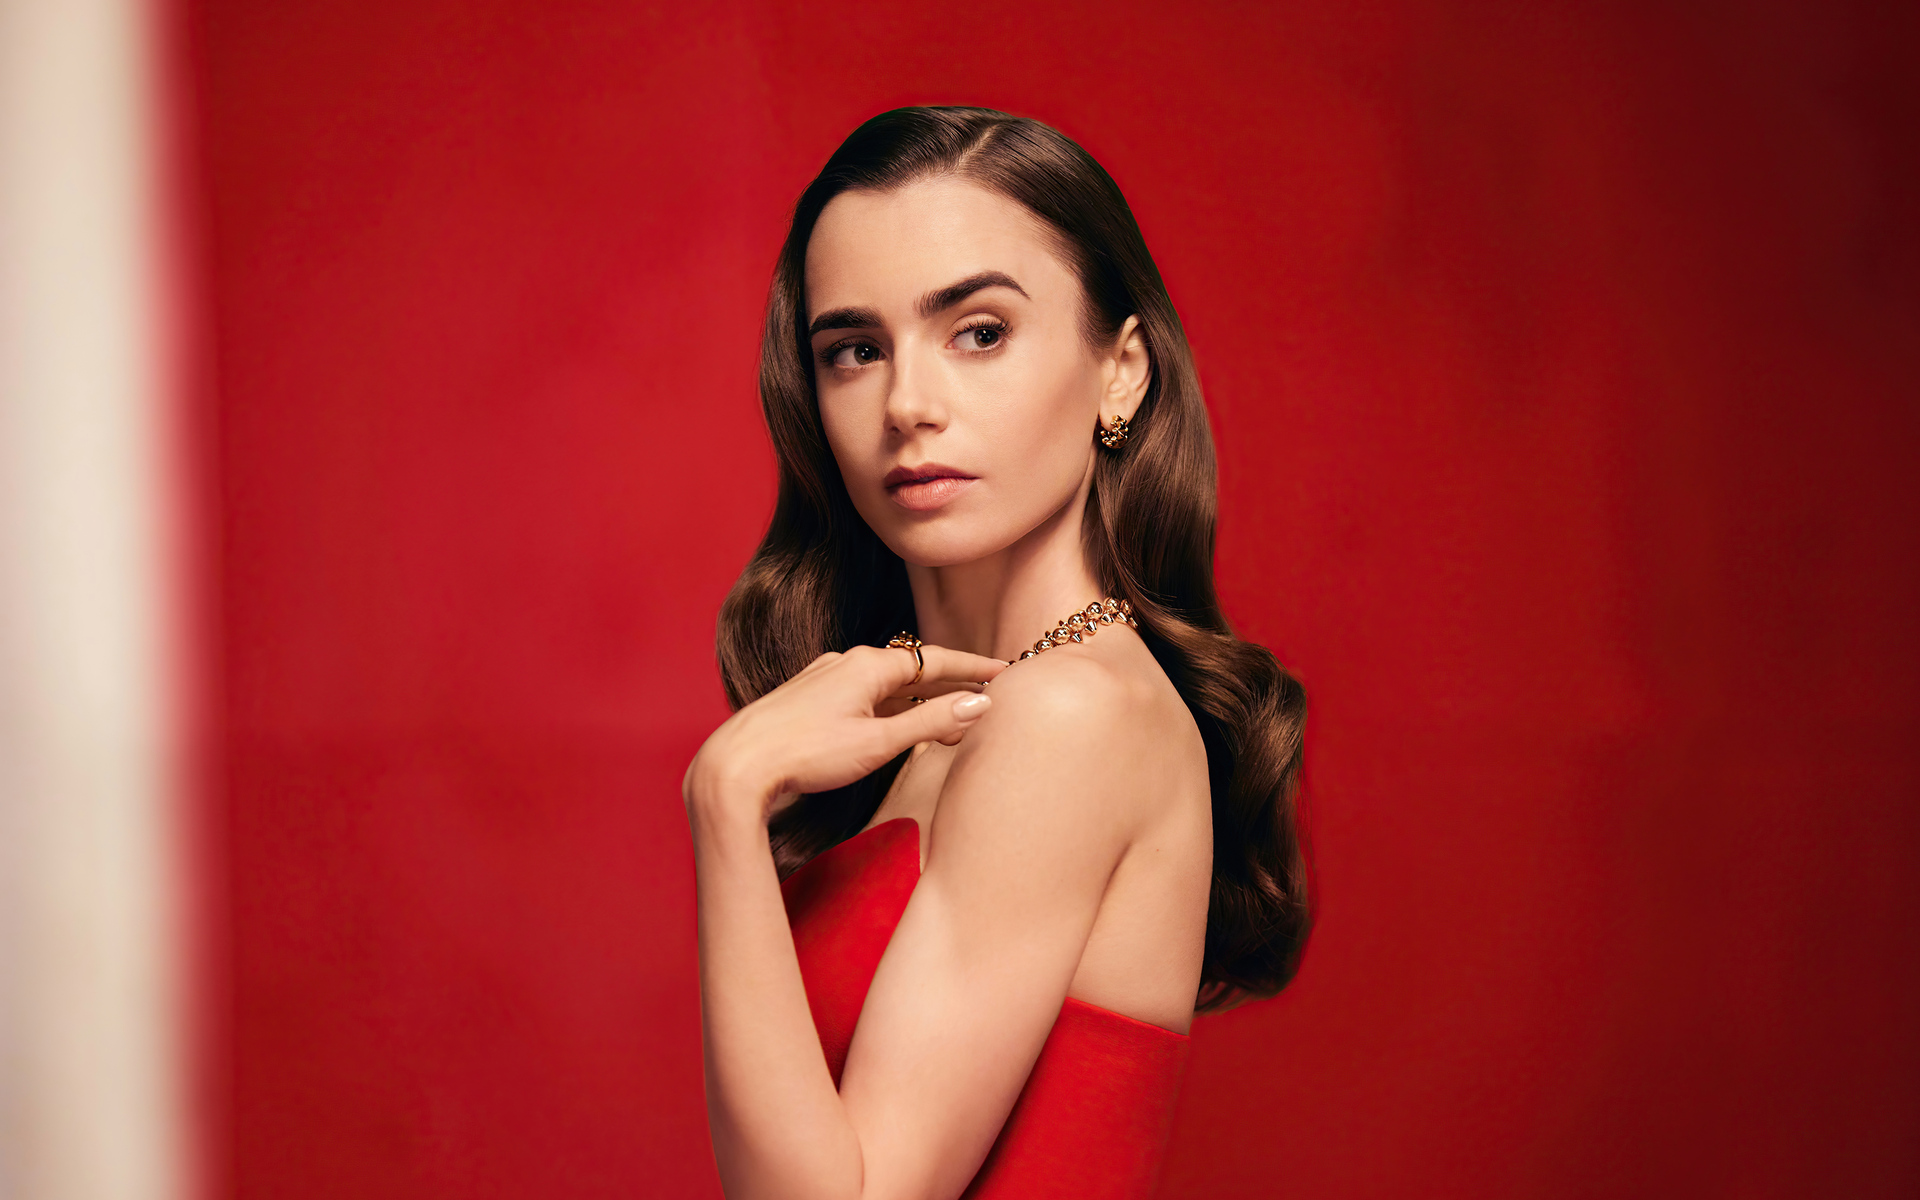 lily-collins-cartier-ws.jpg